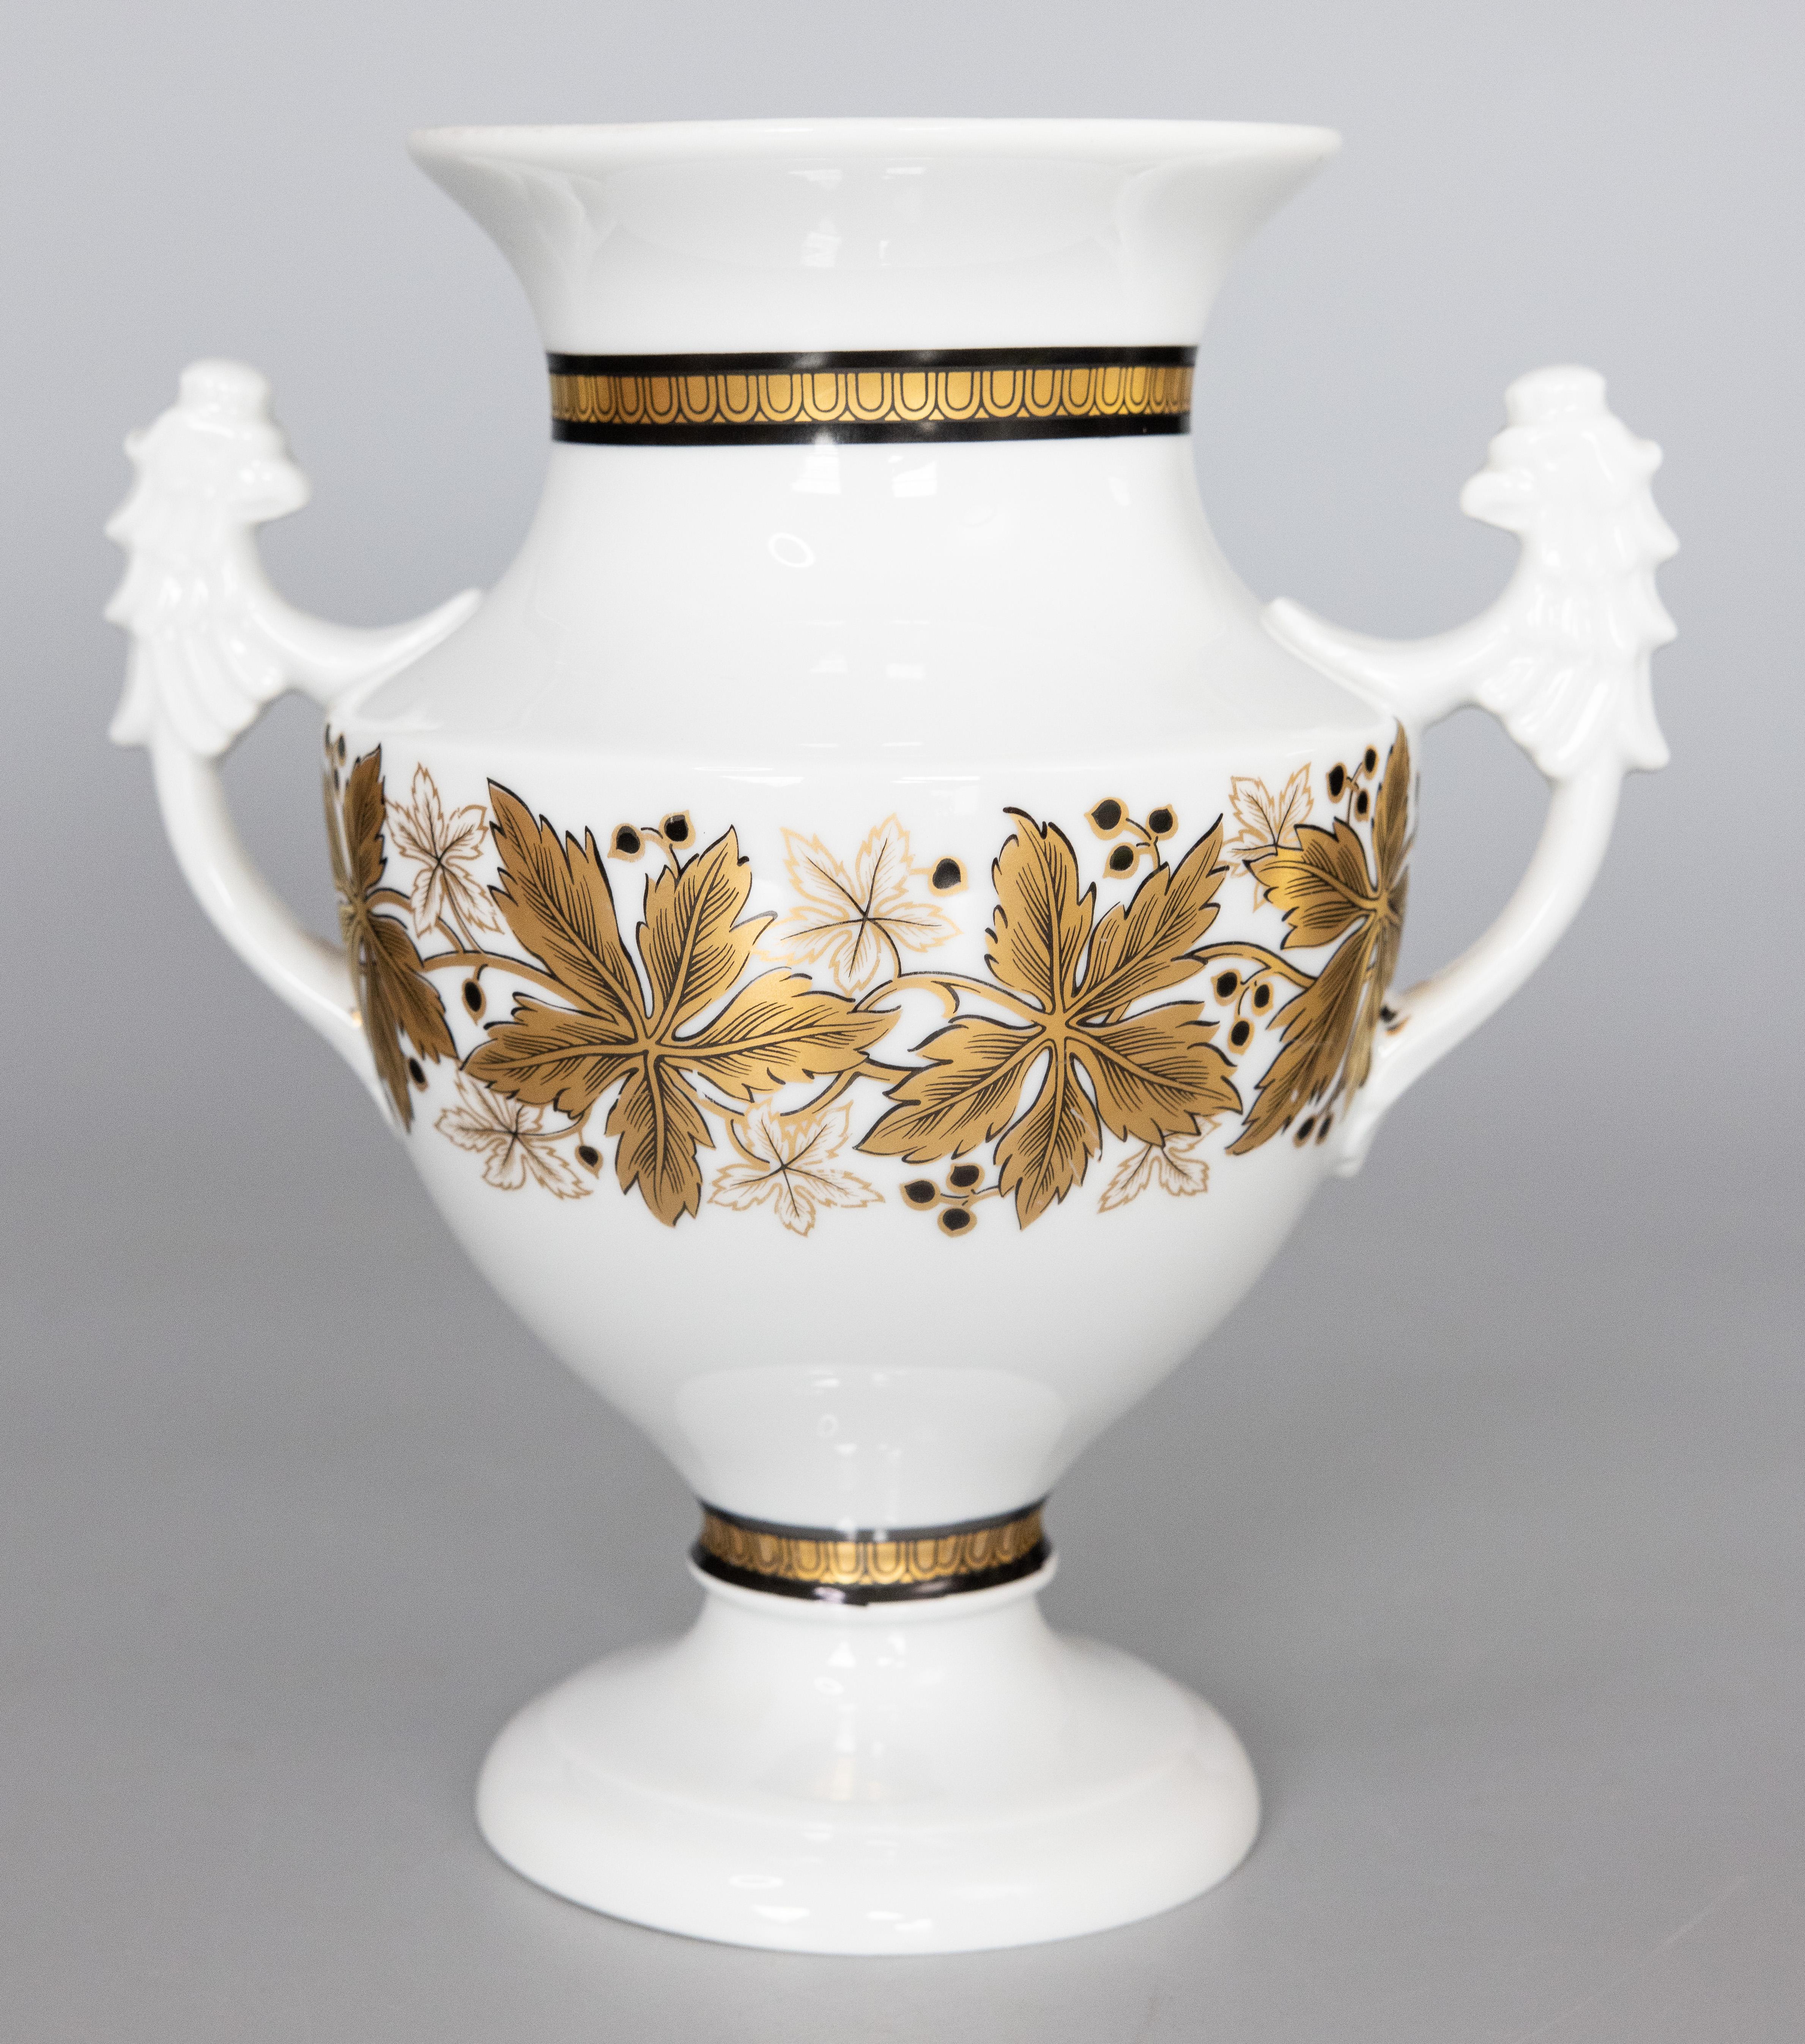 Pair of Neoclassical Royal Tettau German Porcelain White & Gold Urns c. 1930-50 For Sale 2